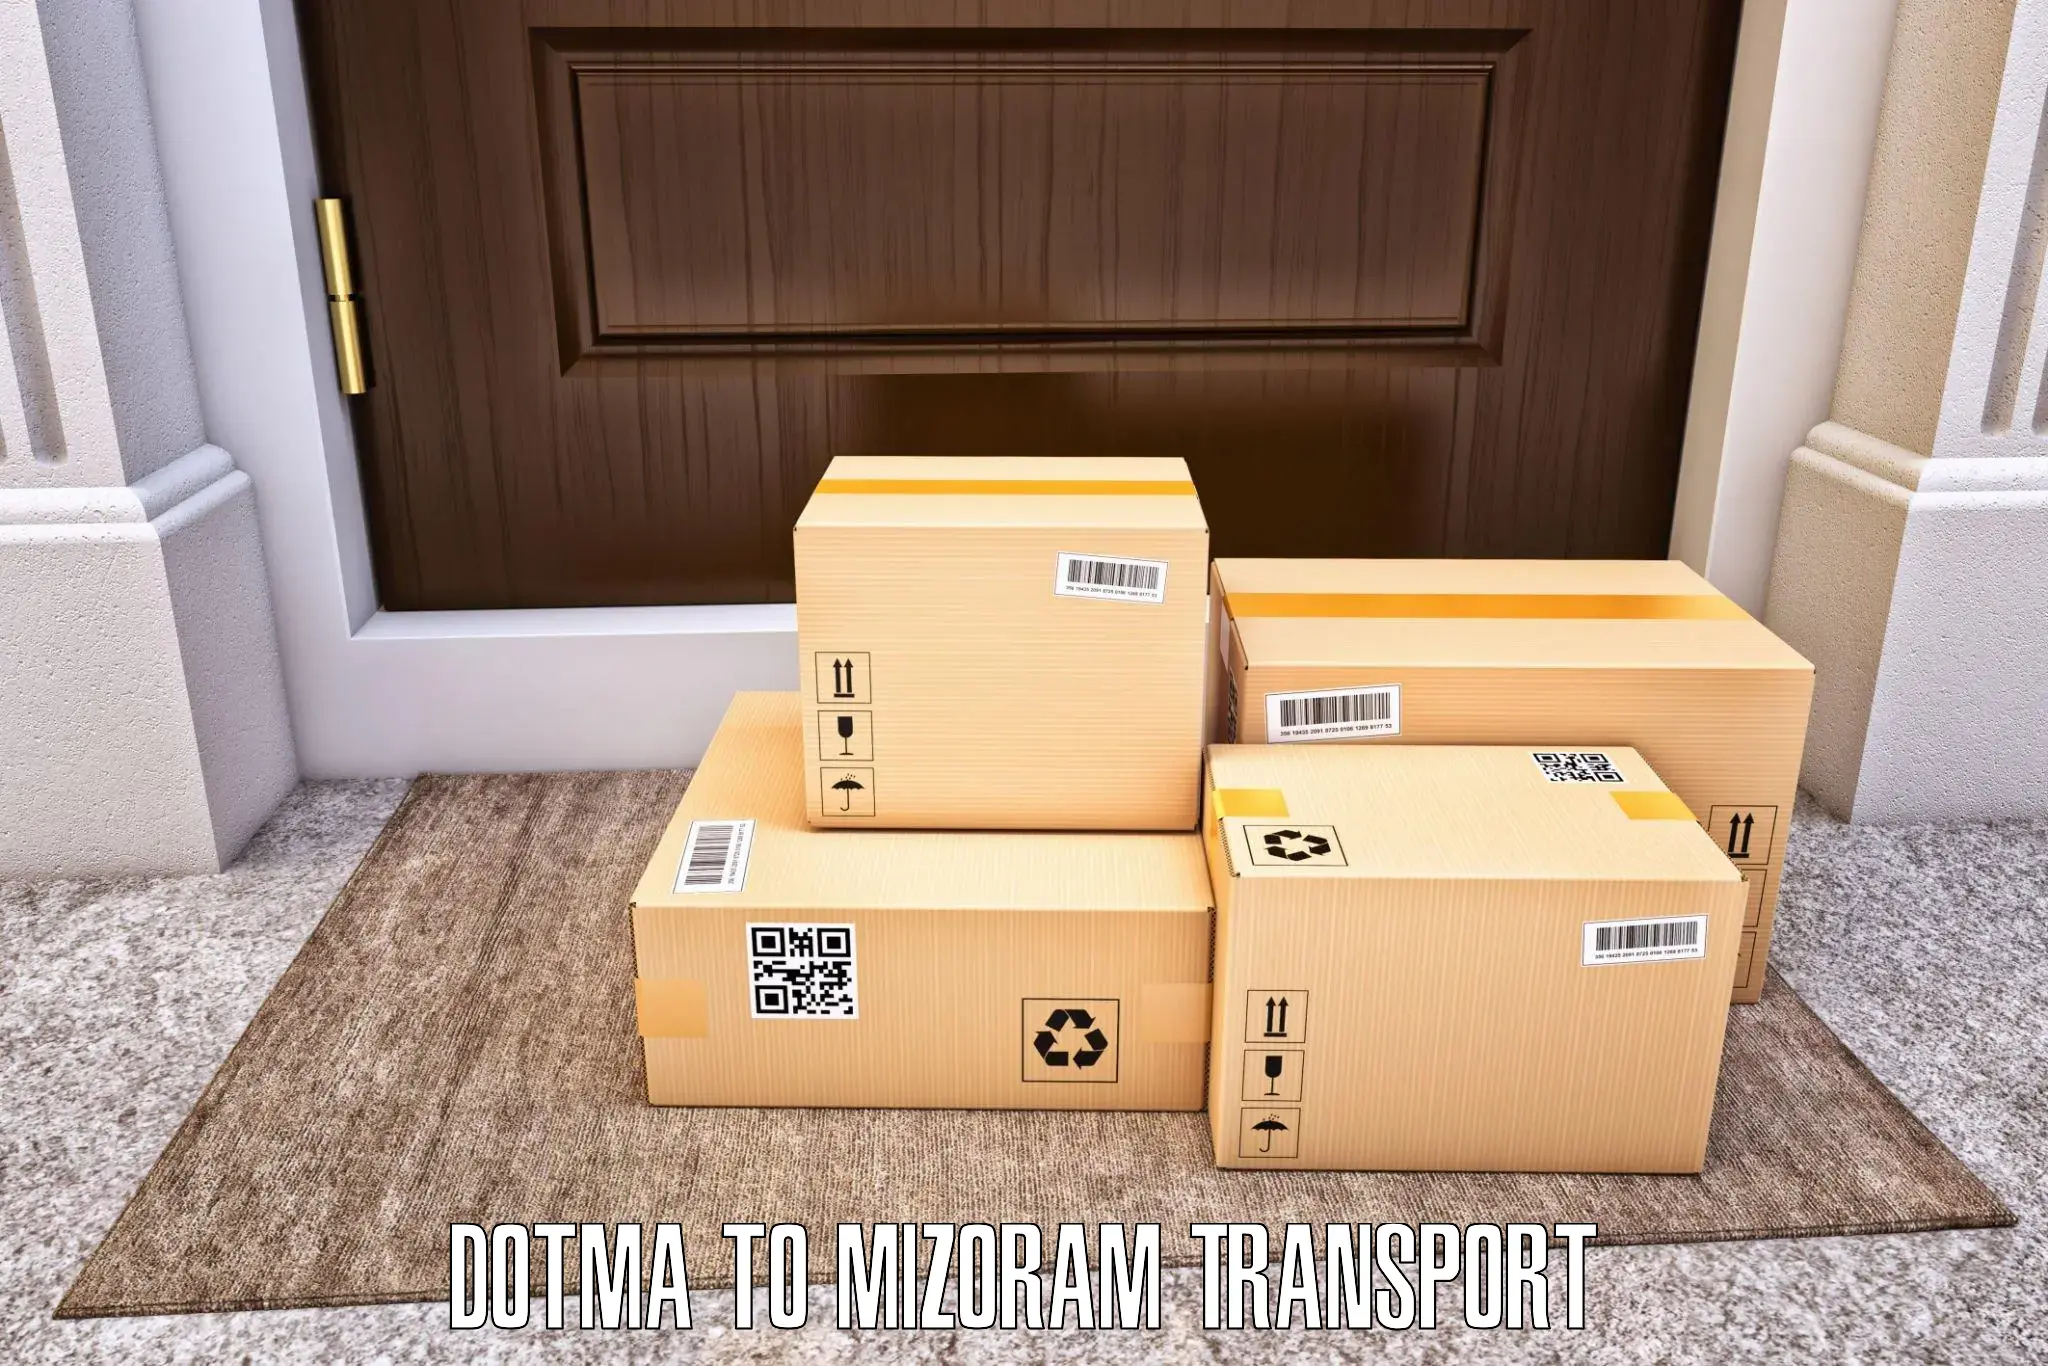 Road transport online services Dotma to Siaha